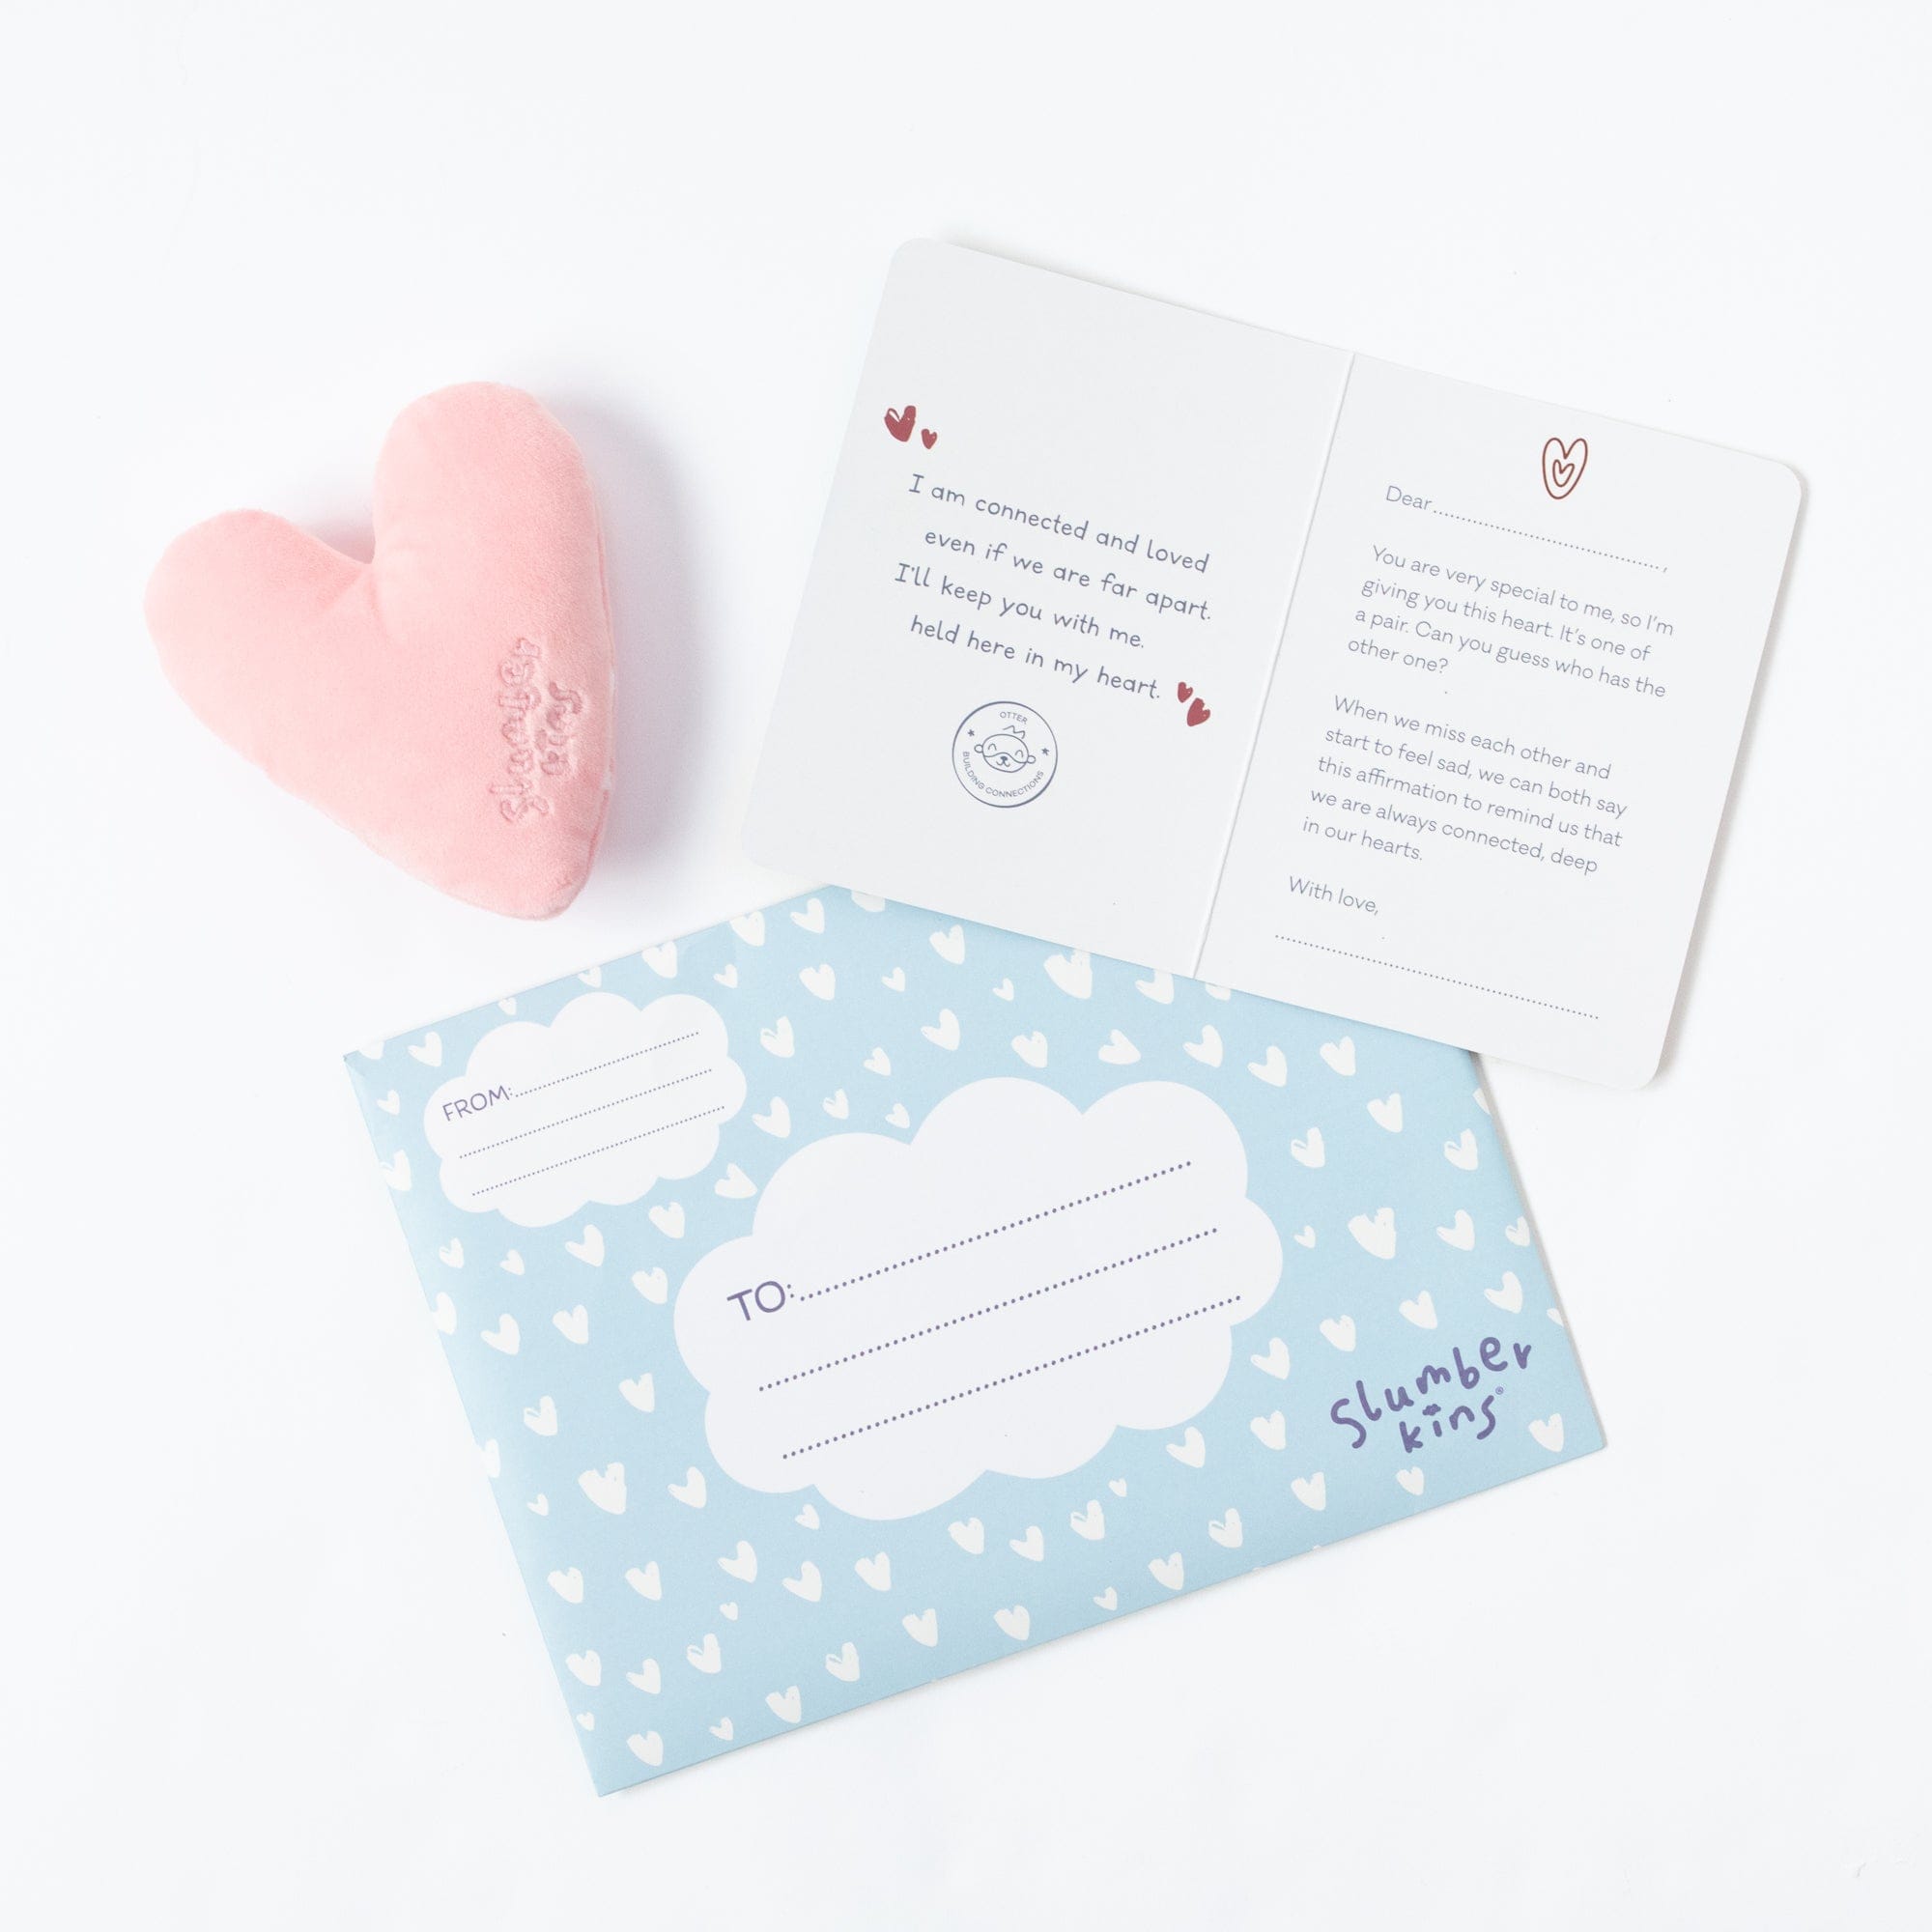 Connected Heart to Heart Kit - View Product